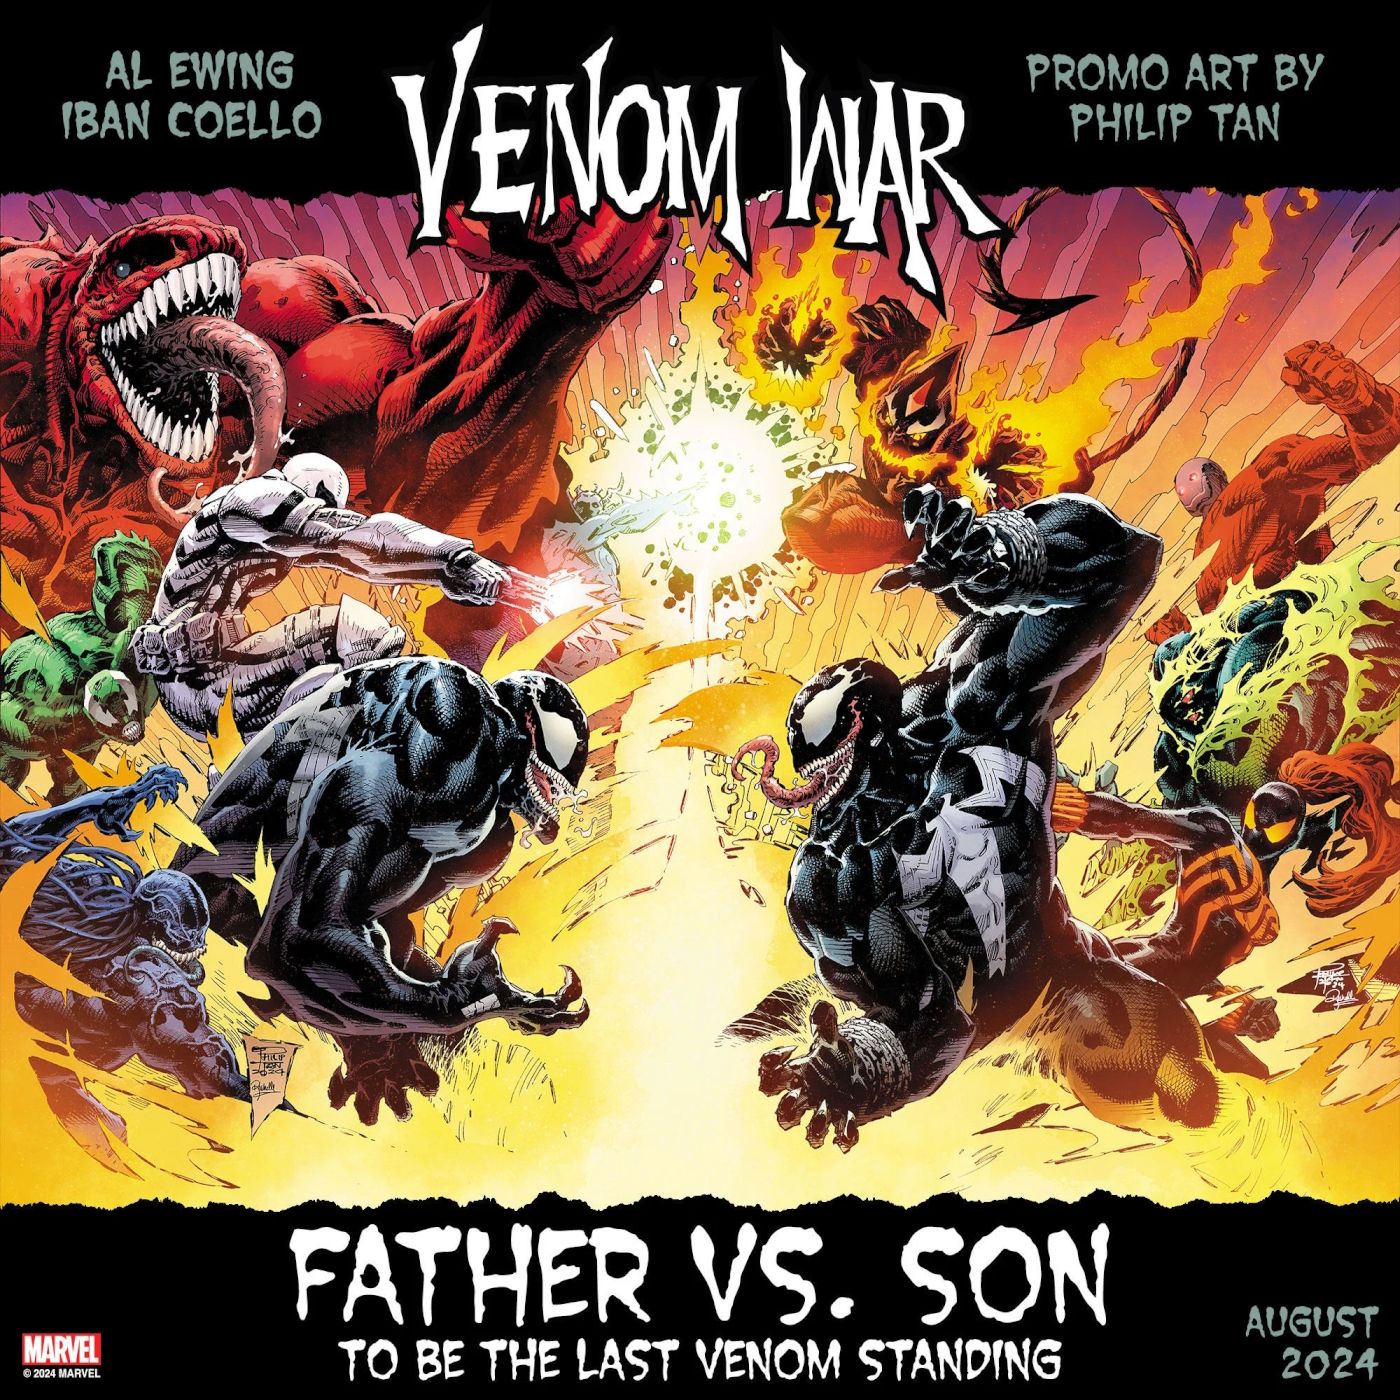 Marvel’s VENOM WAR Pits Father Against Son in a Massive Symbiote Battle Royale